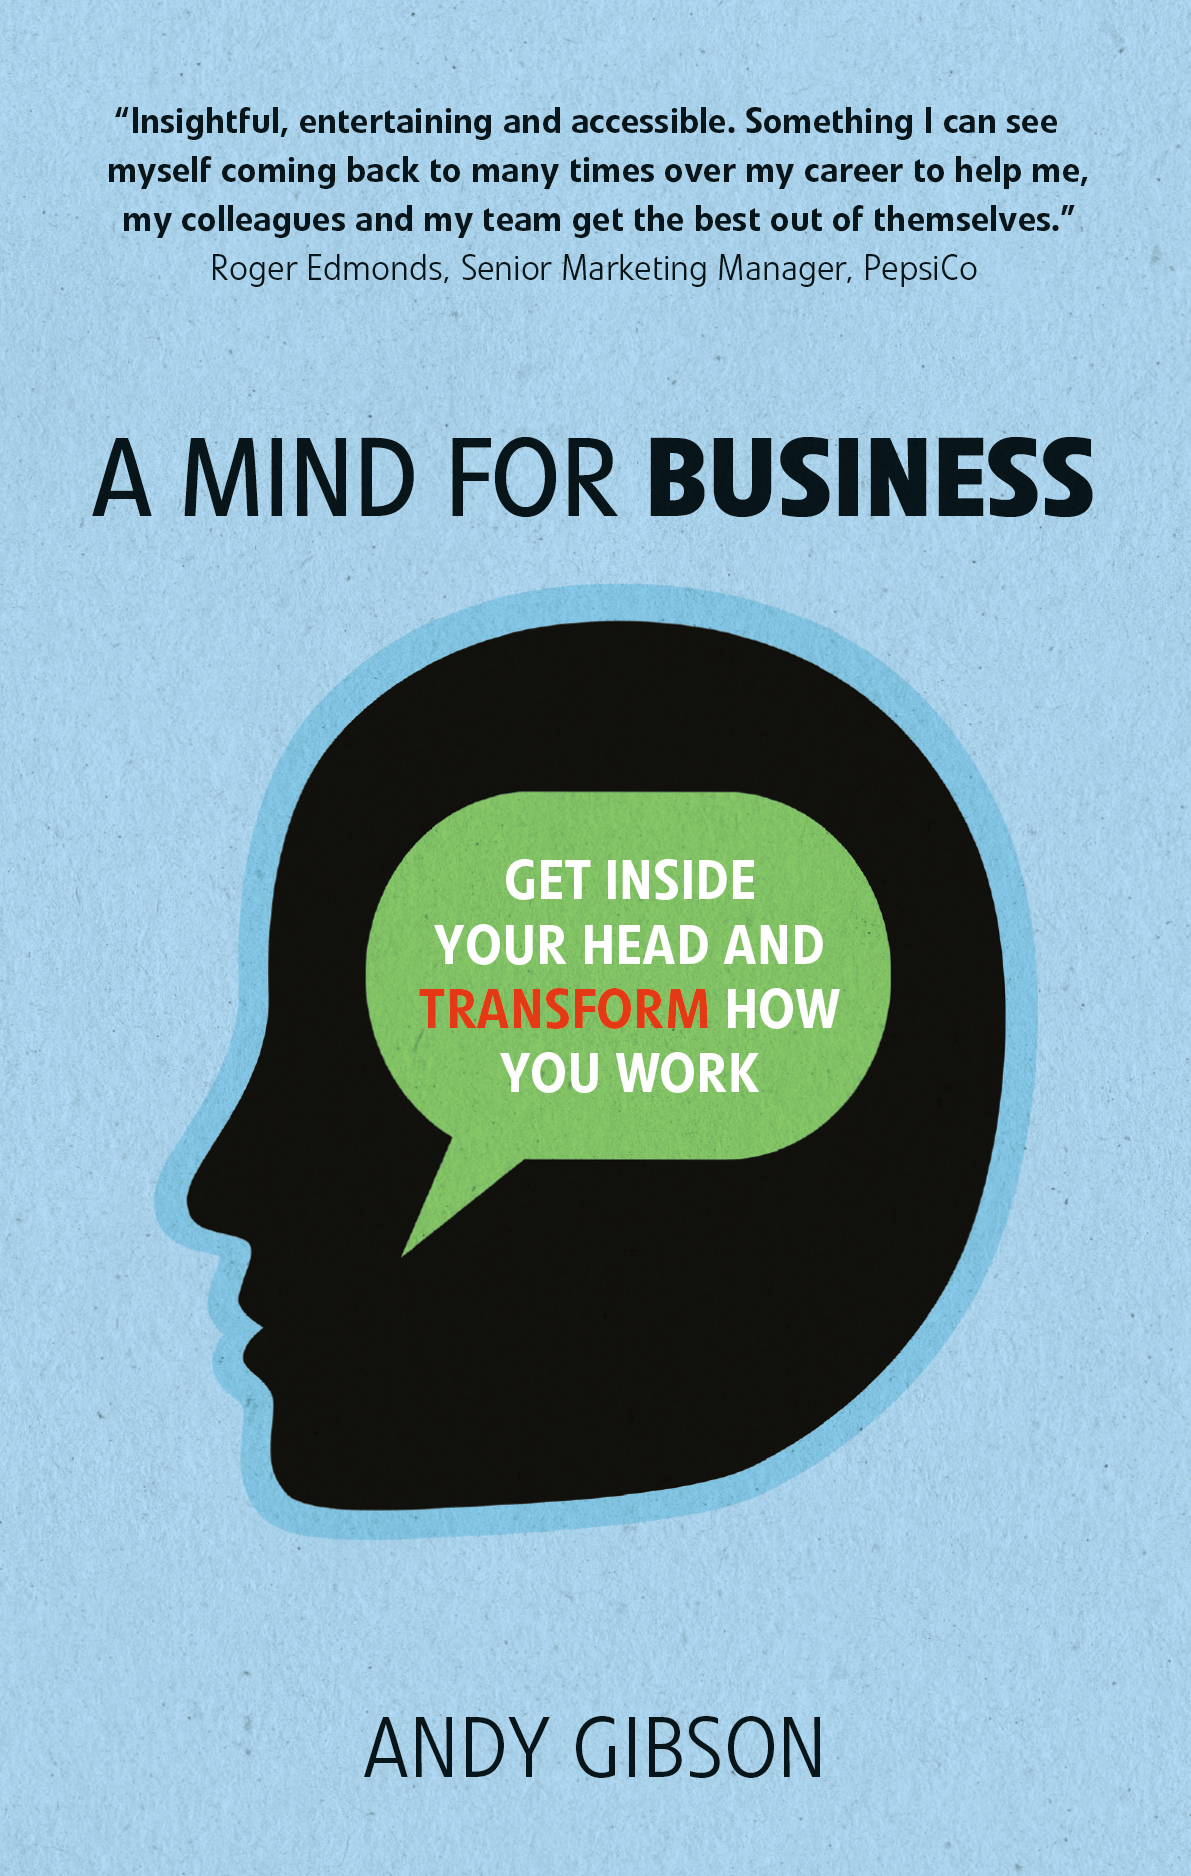 A Mind for Business, by Andy Gibson